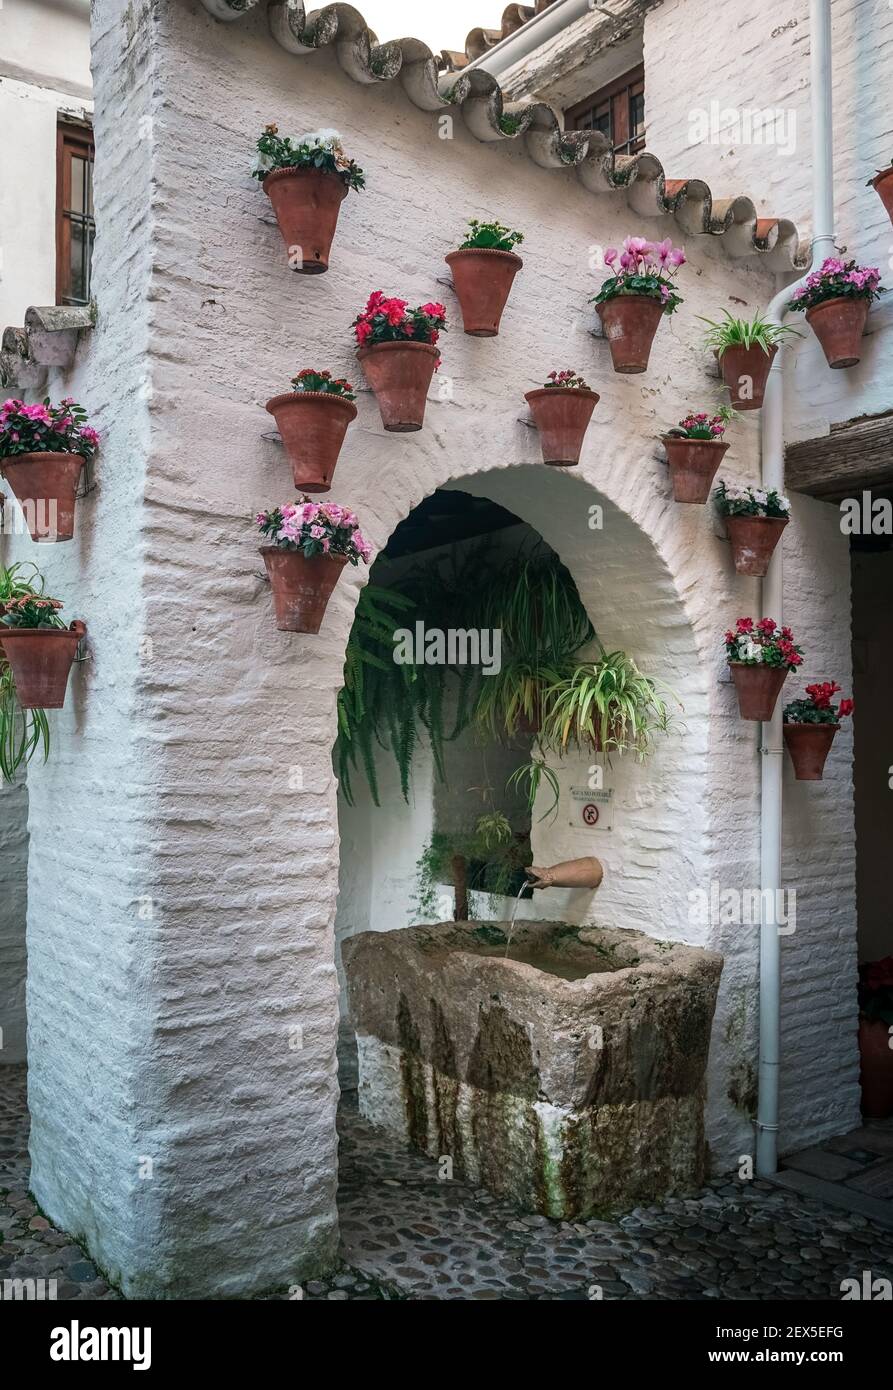 Traditional Andalusian patio, in Cordoba, Andalusia, Spain. Pots of colorful flowers on the white walls Stock Photo